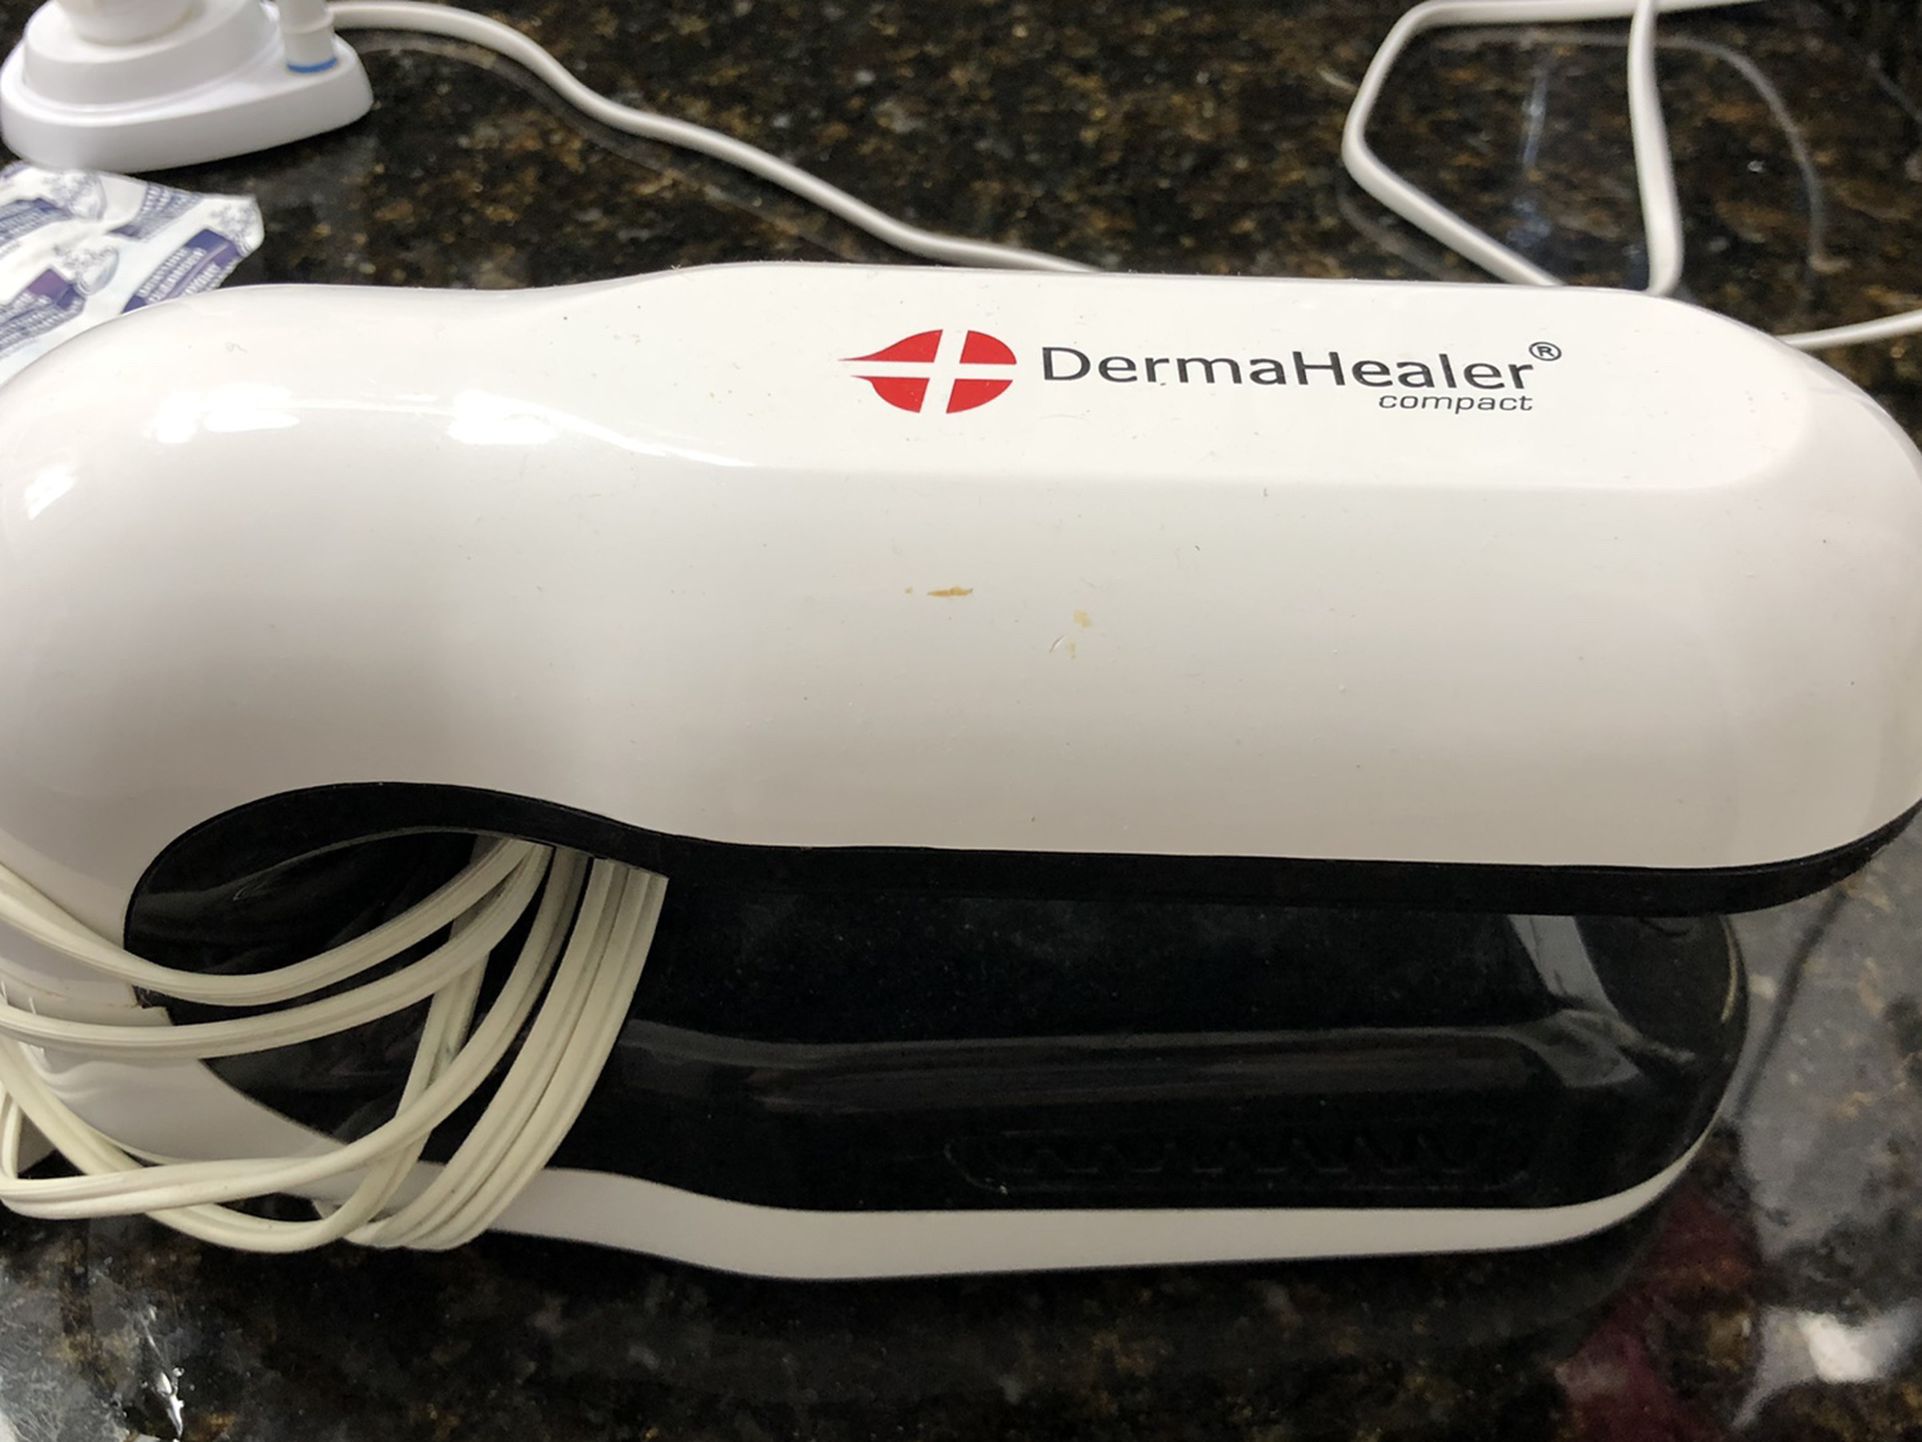 DermaHealer Compact UVB Light Therapy Lamp